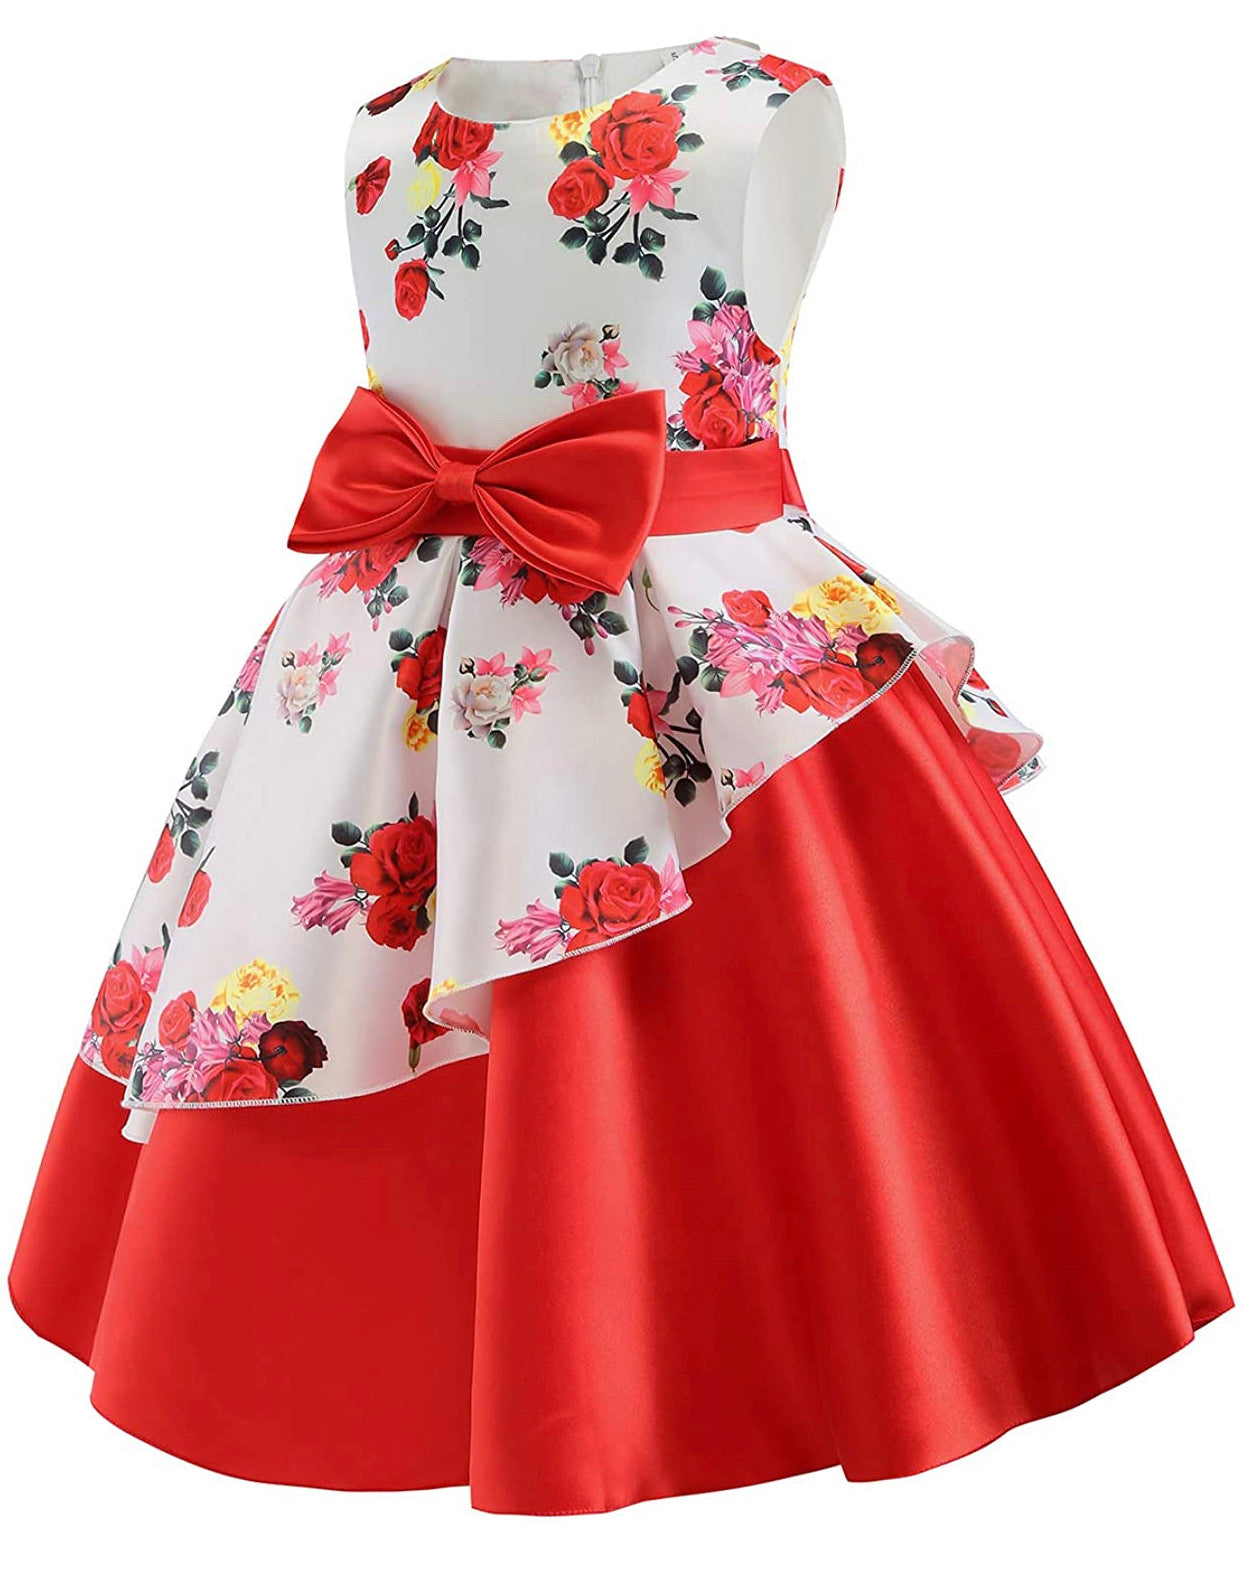 Little Girl’s Formal Floral Print Dress, Sizes 2T - 9 years (Red)